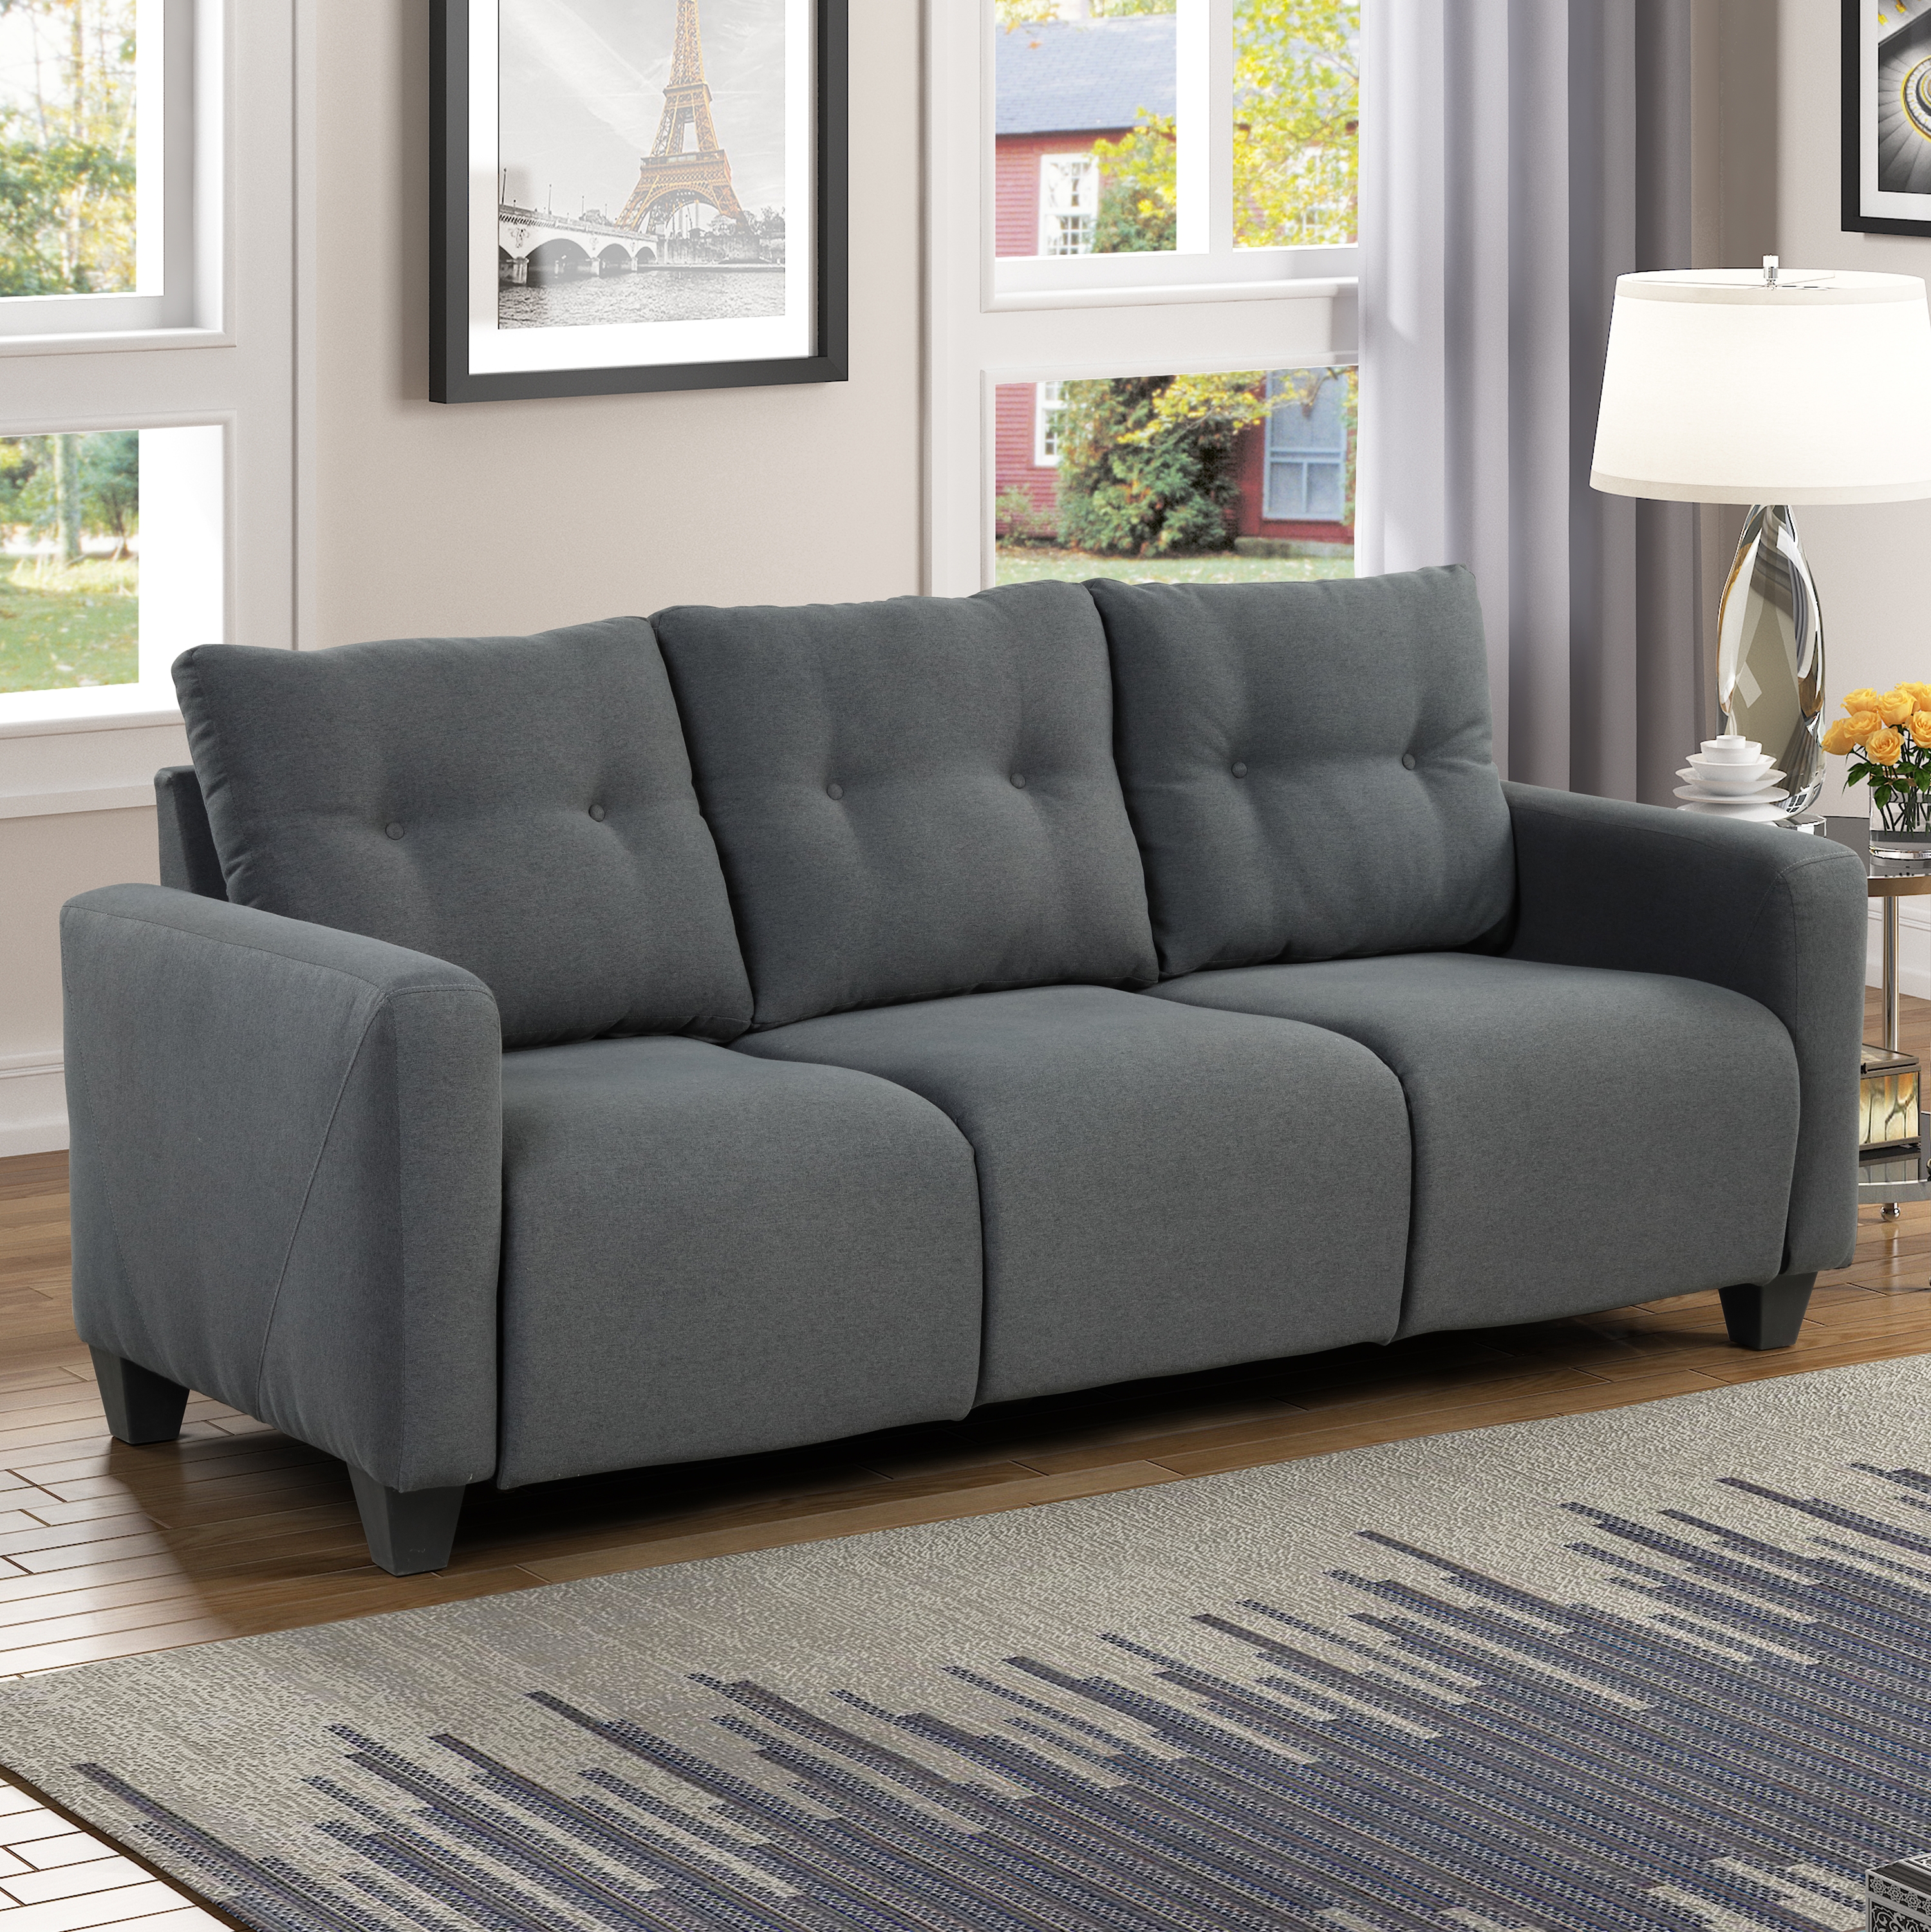 Details about   Upholstered Living Room Sofa Microfiber Fabric Soft Foam Cushions Compact Couch 